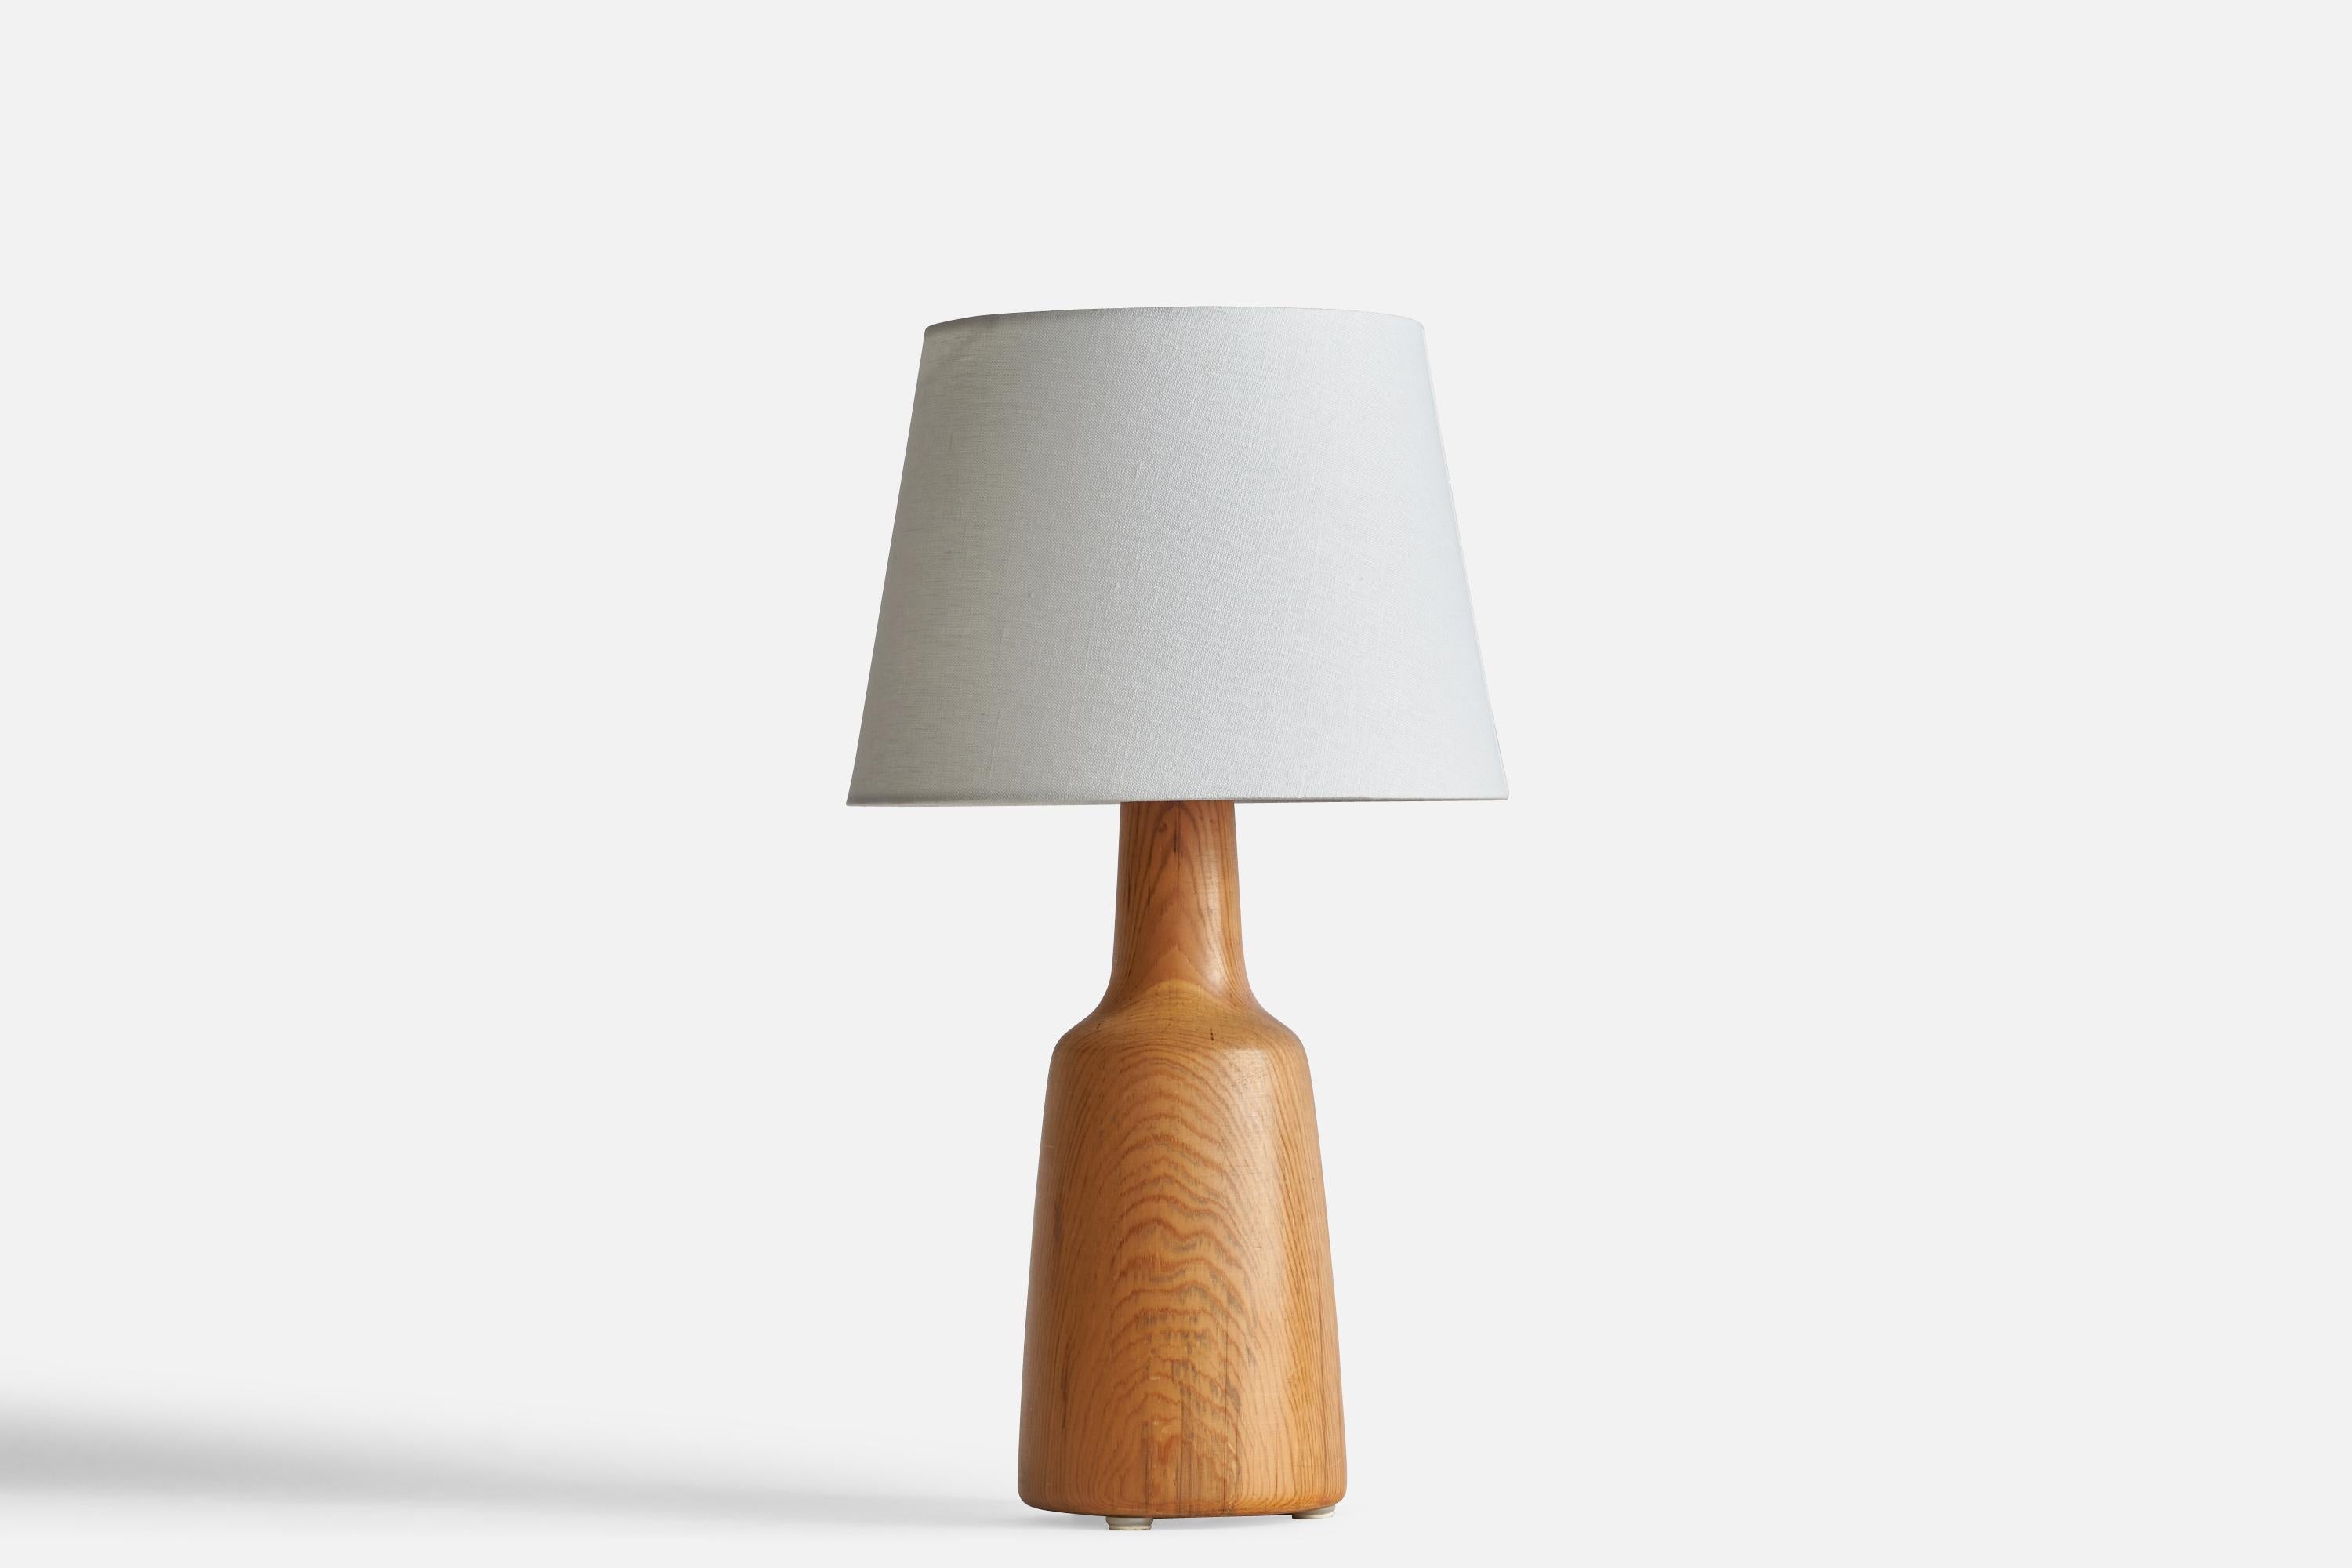 A pine table lamp designed and produced in Sweden, 1977.

Dimensions of Lamp (inches): 15.25” x 6.22” Diameter
Dimensions of Shade (inches): 9” Top Diameter x 12” Bottom Diameter x 9” H
Dimensions of Lamp with Shade (inches): 19.75” H x 12”